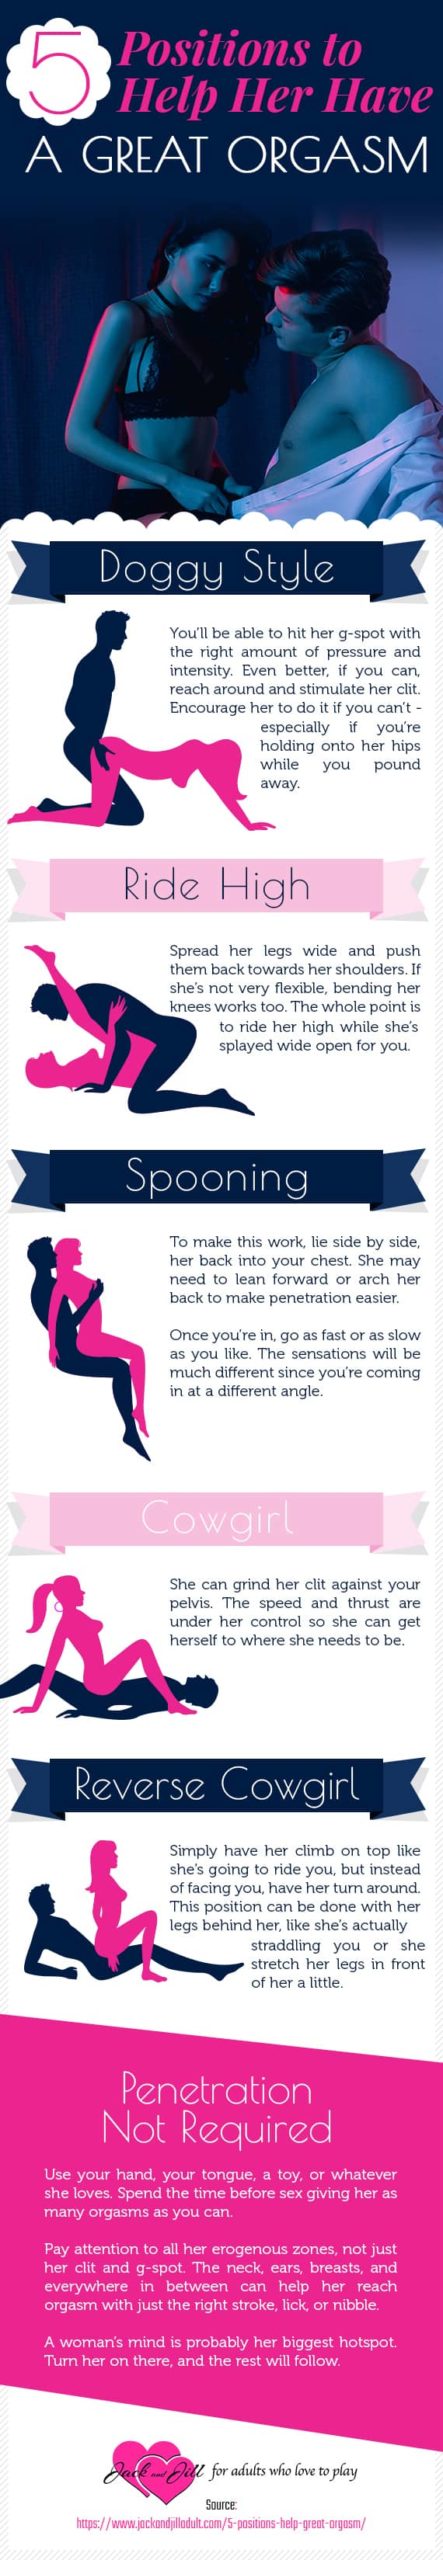 Infographic for 5 Positions to Help Her Have Better Orgasms